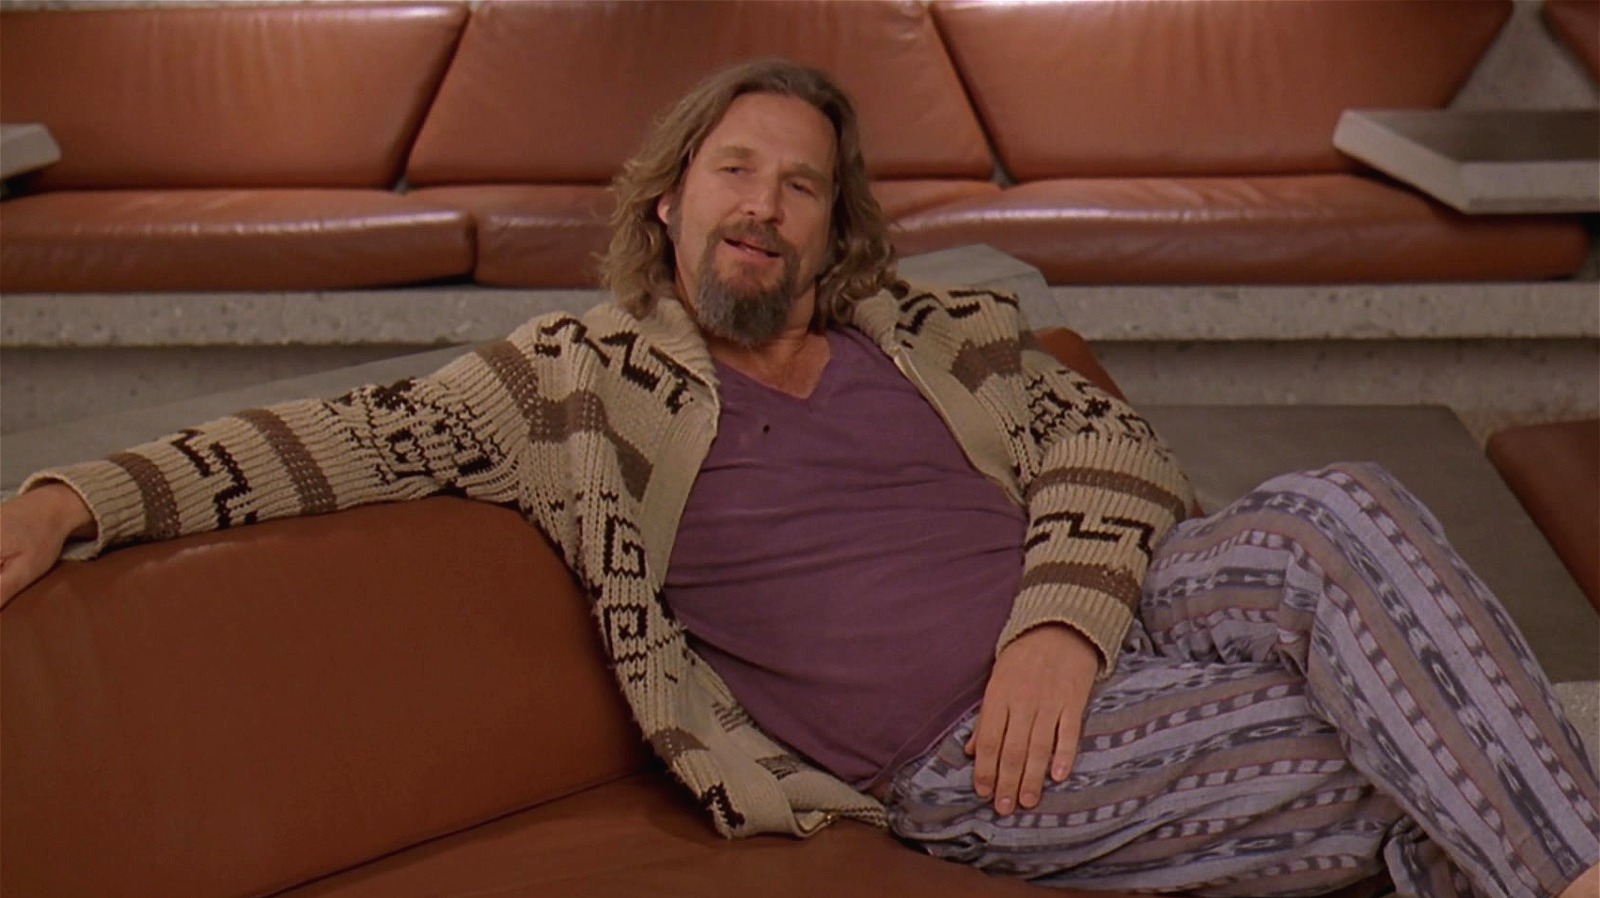 Double Mute. It's a real thing. - Big Lebowski